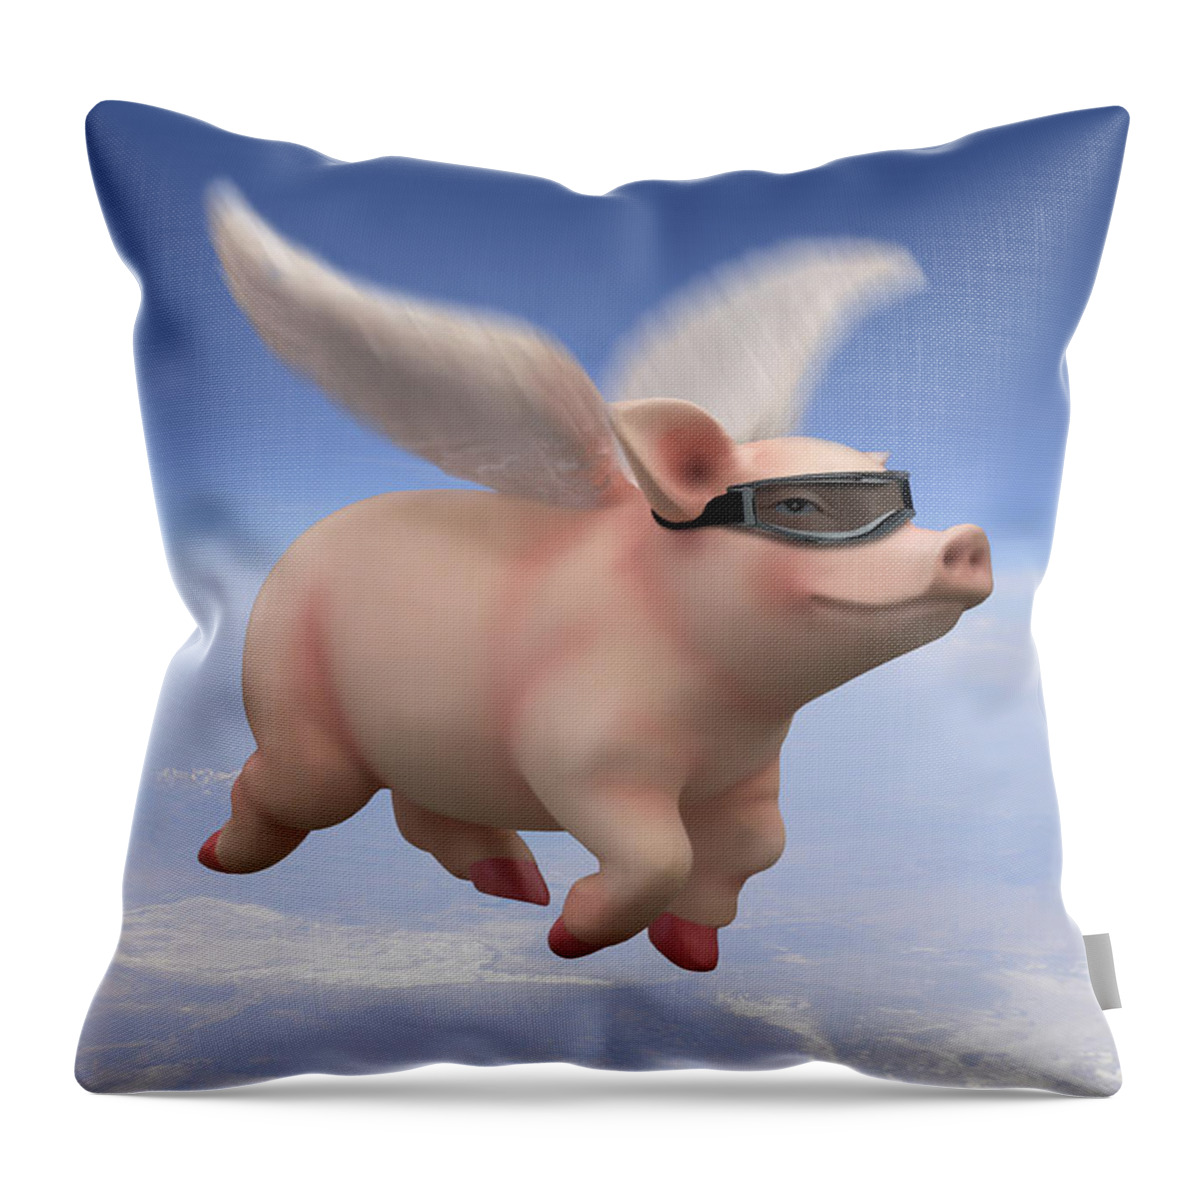 Pigs Fly Throw Pillow featuring the photograph Pigs Fly by Mike McGlothlen